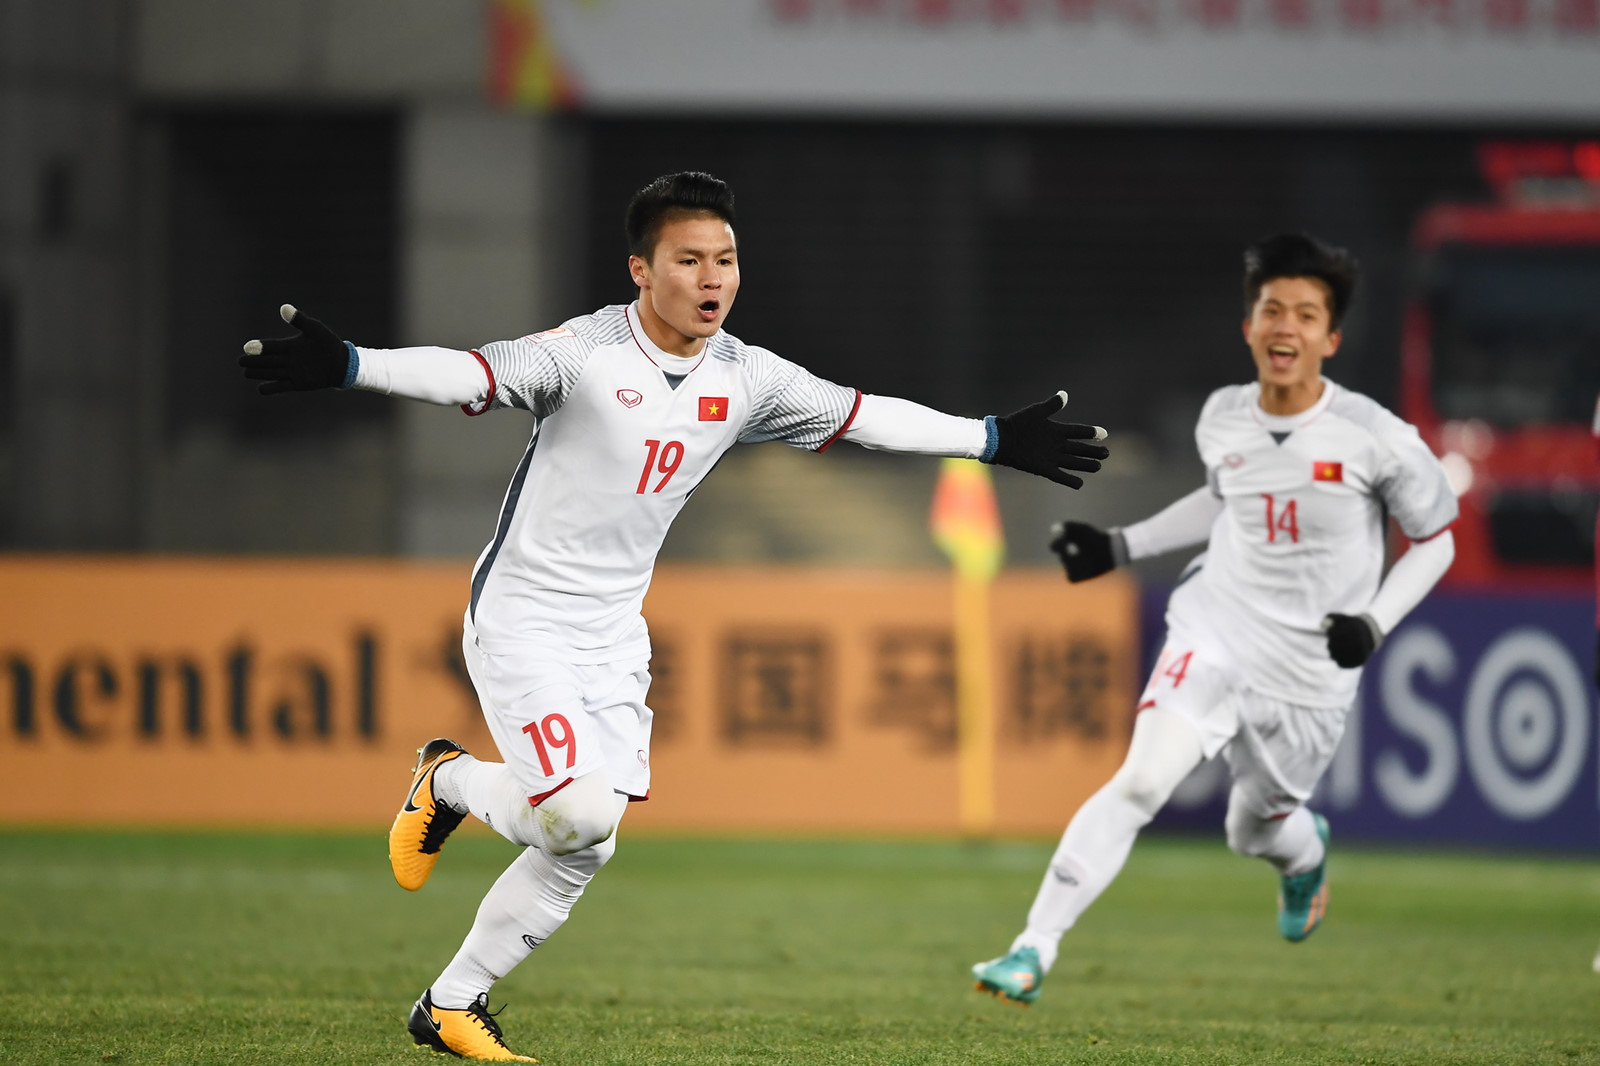 Striker Nguyen Quang Hai (L) celebrates after scoring a goal during the 2018 AFC U23 Championship in China. Photo: Reuters